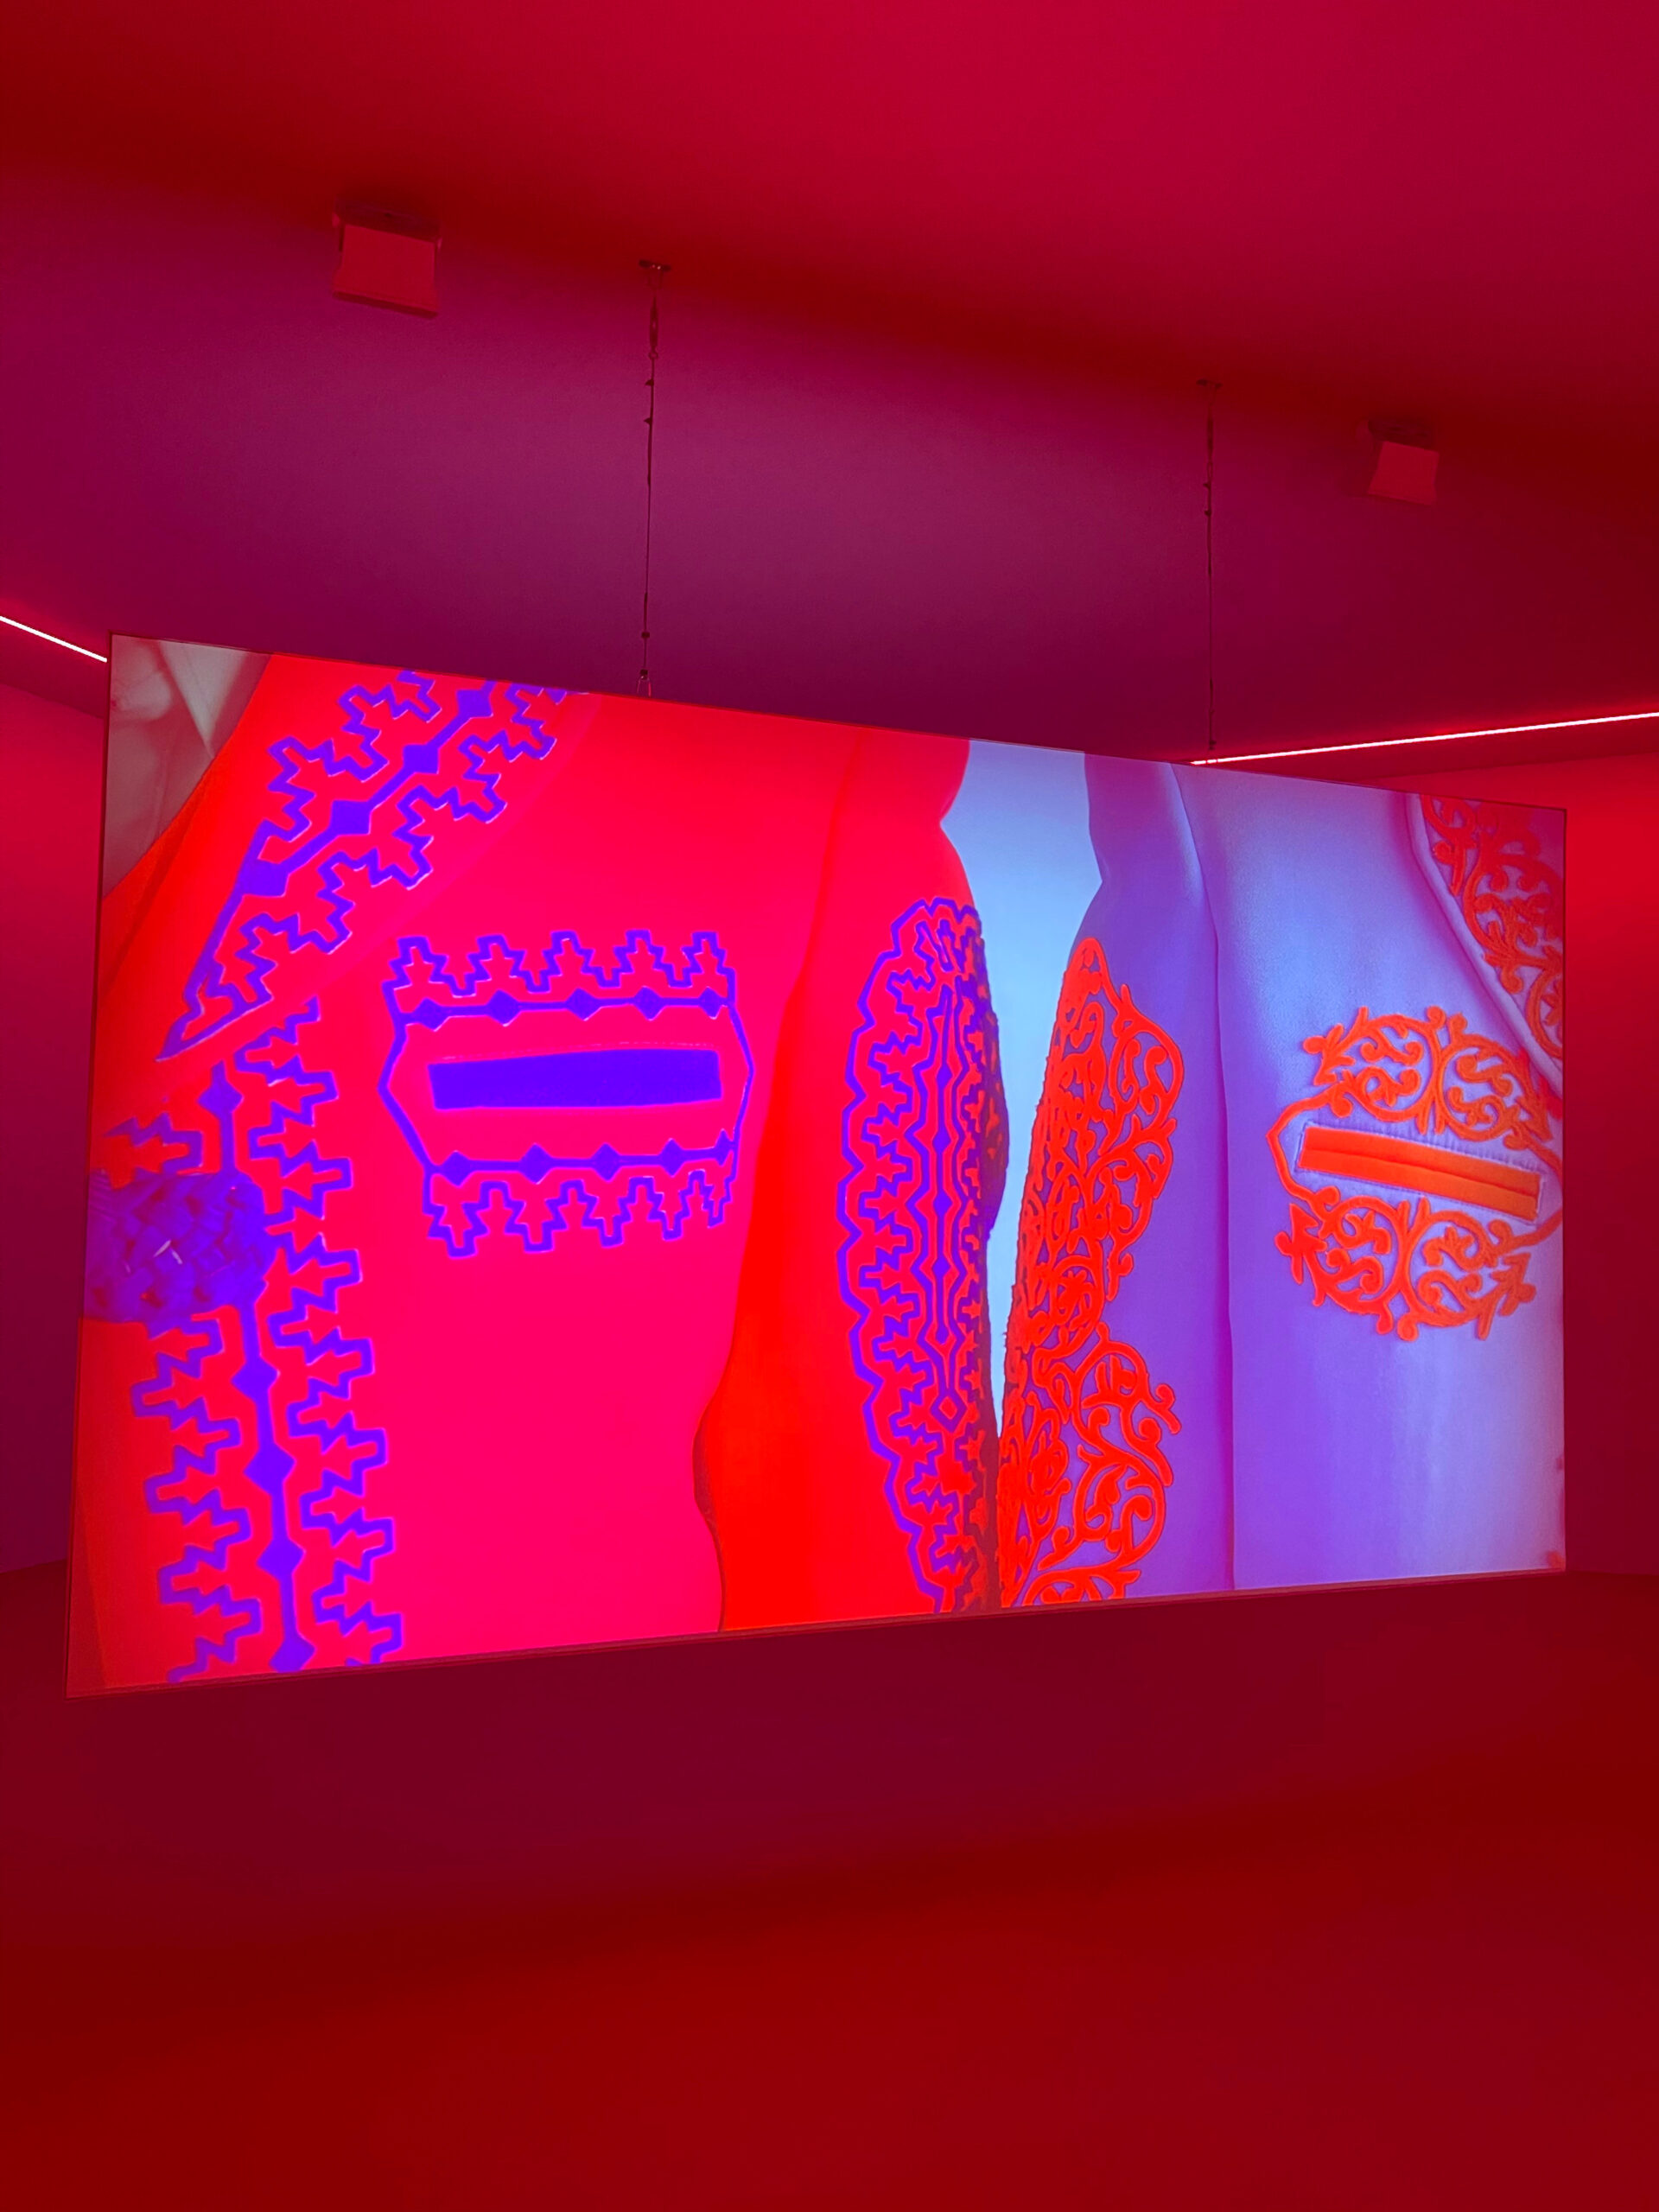 a red room with a digital screen that has motif on it and red and purple